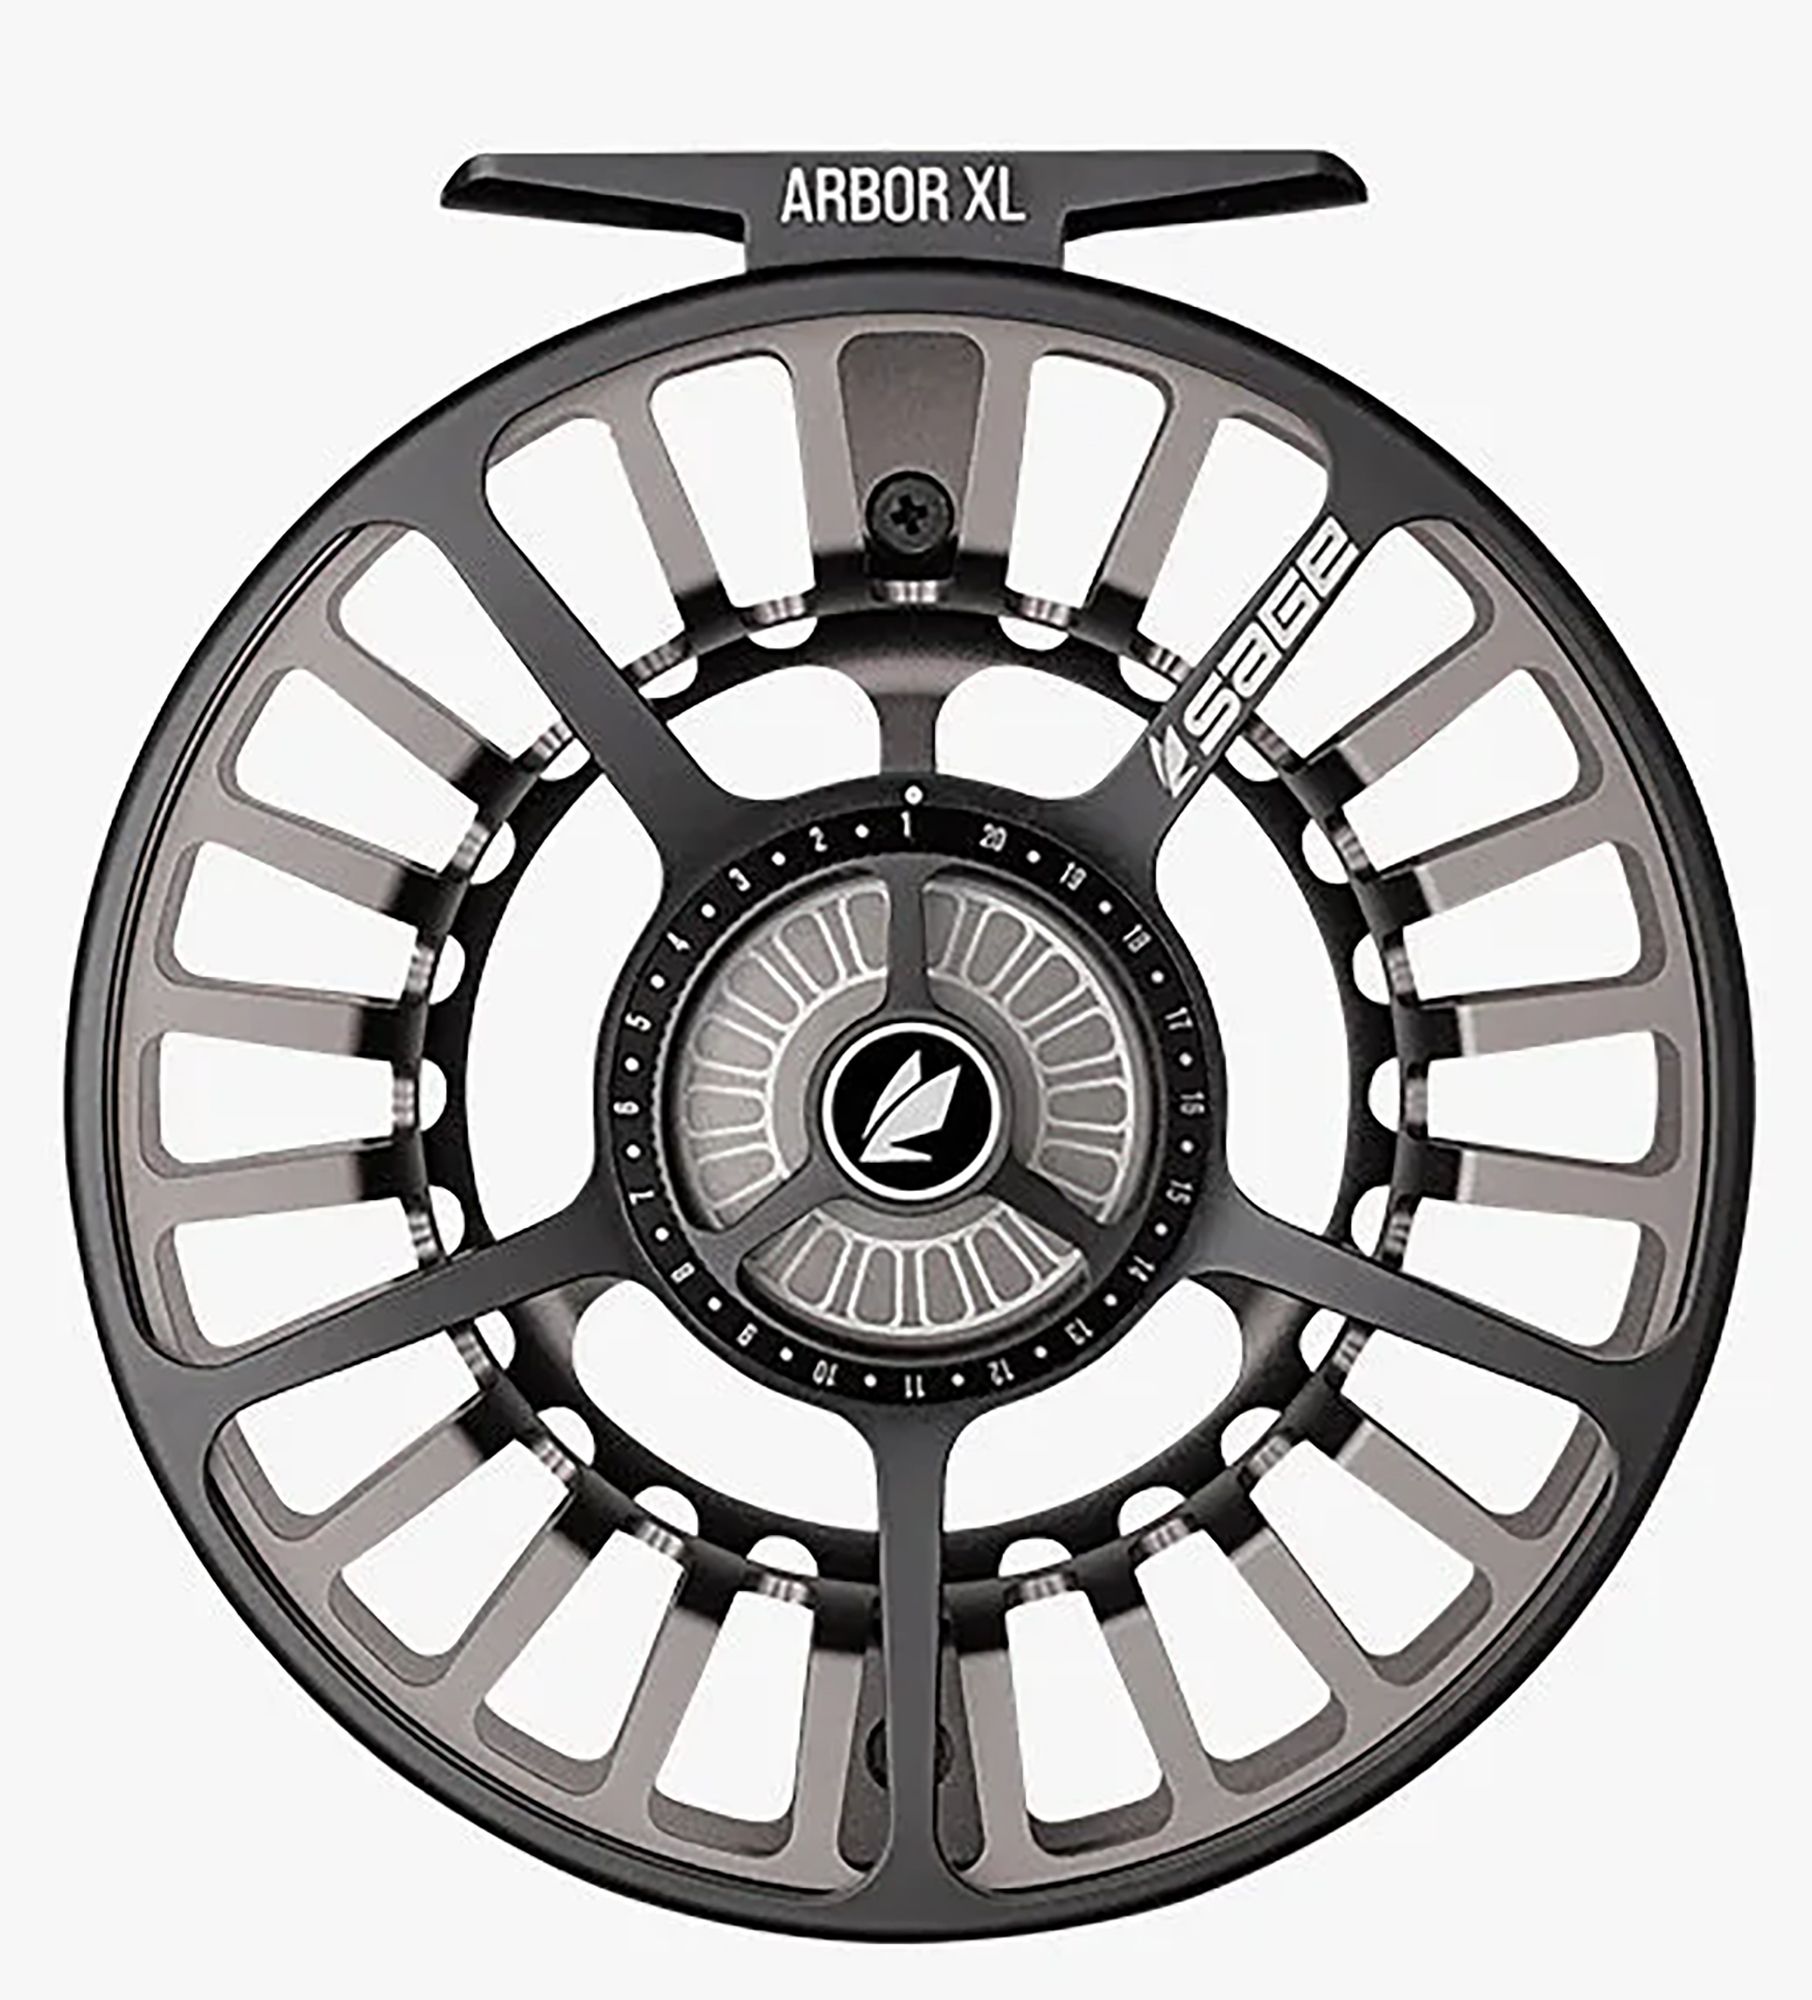 Photos - Other for Fishing Sage Arbor XL Fly Reel, Slate 22SGEARBRXL456RLSREE 